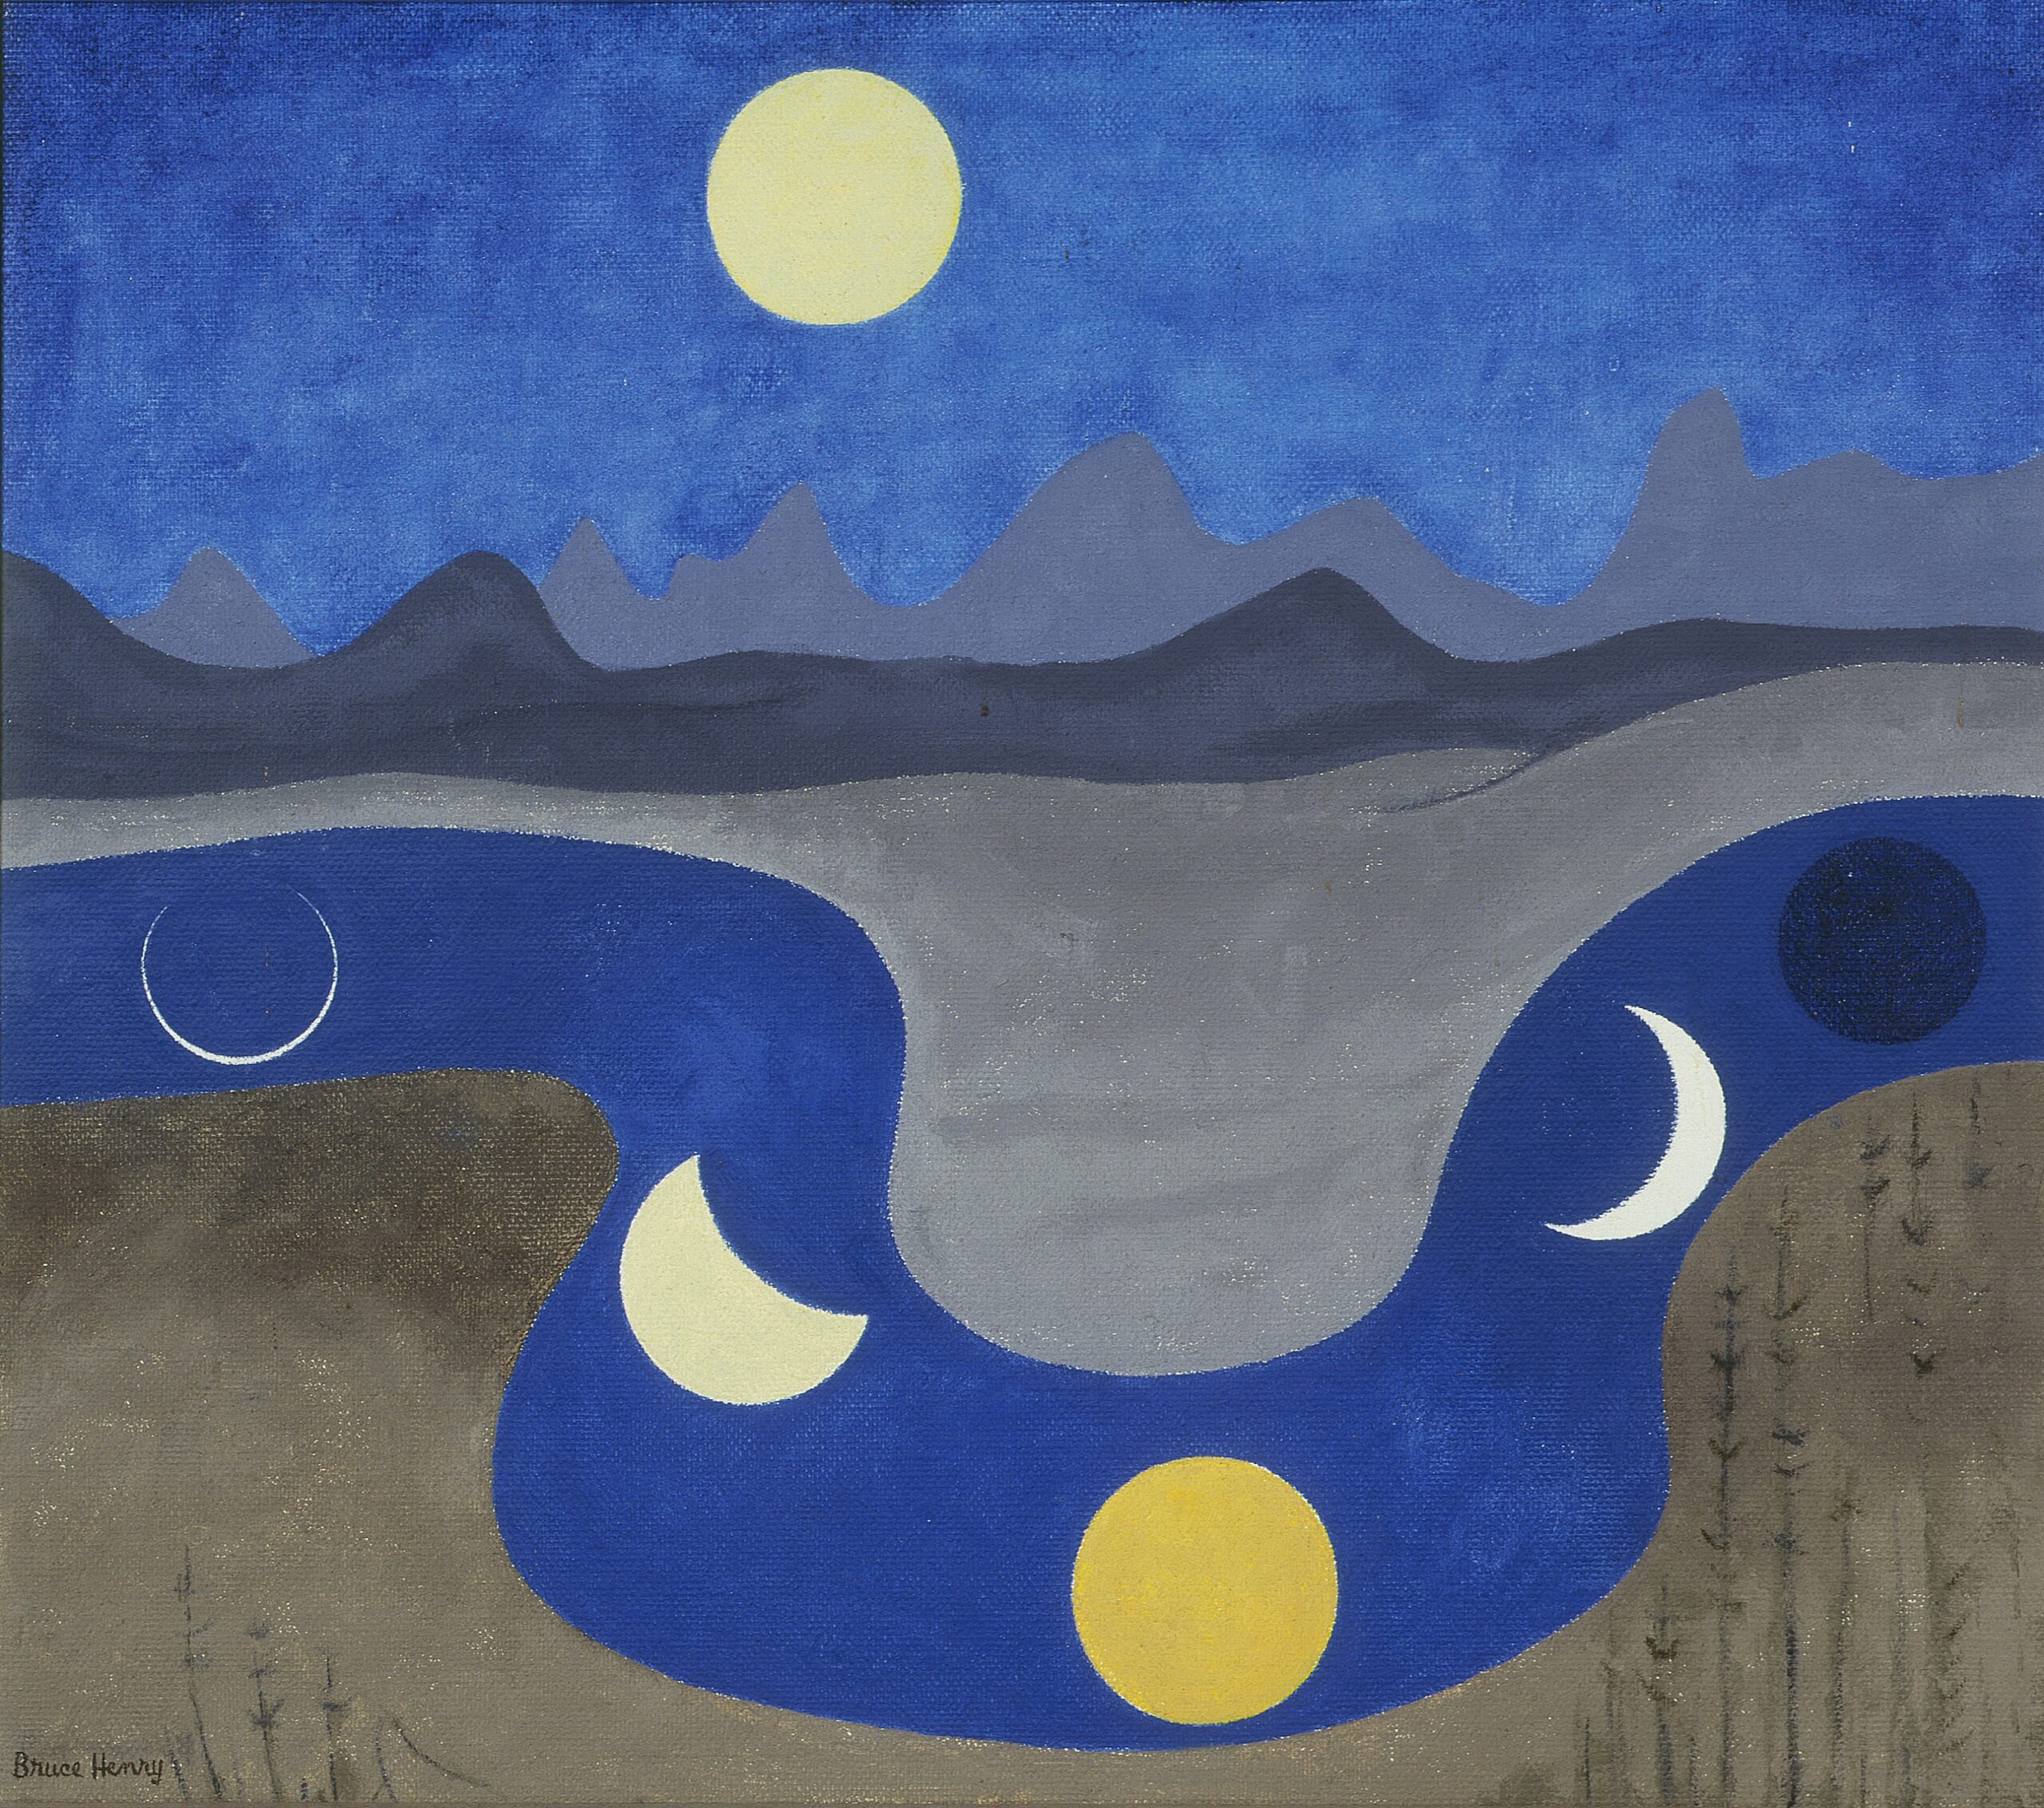 Painting of a winding river, with different phases of the moon showing along its length.